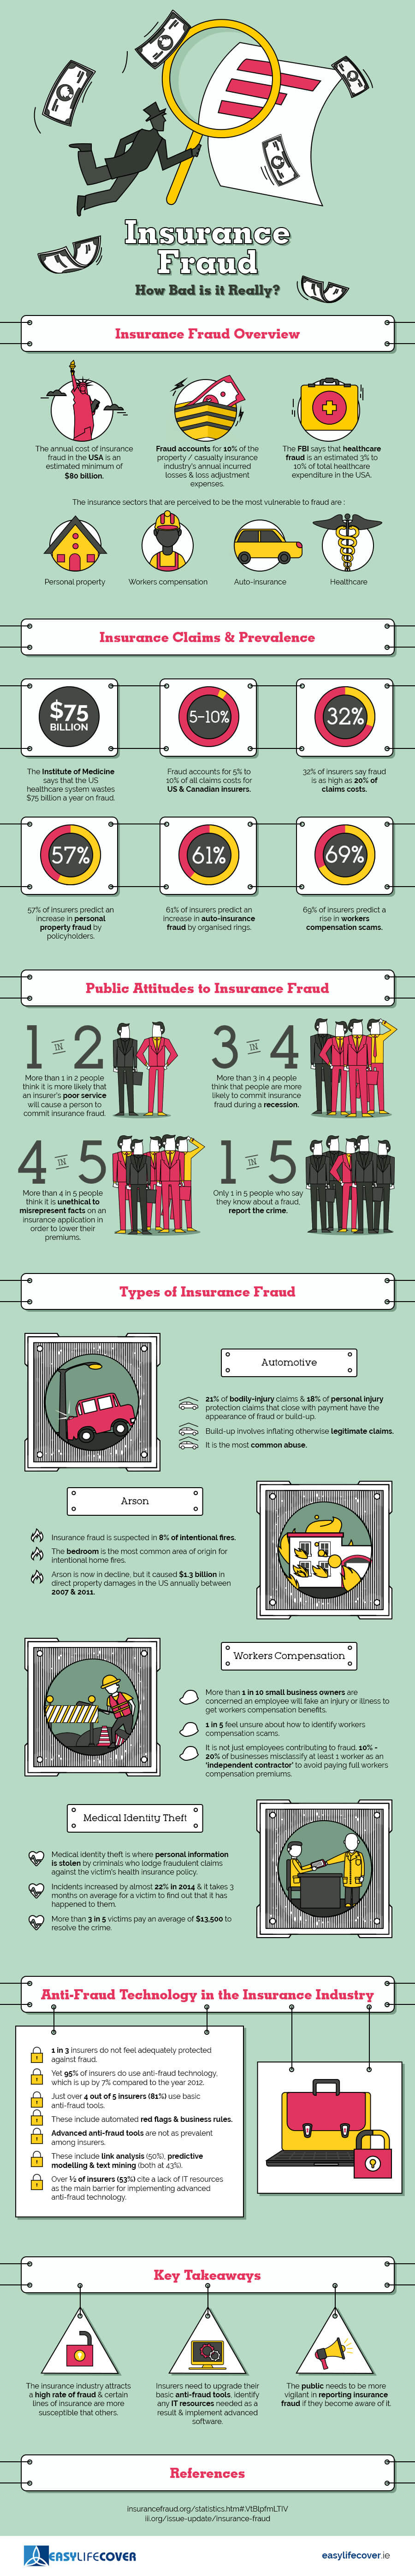 The-World-of-Insurance-Fraud-Infographic-plaza